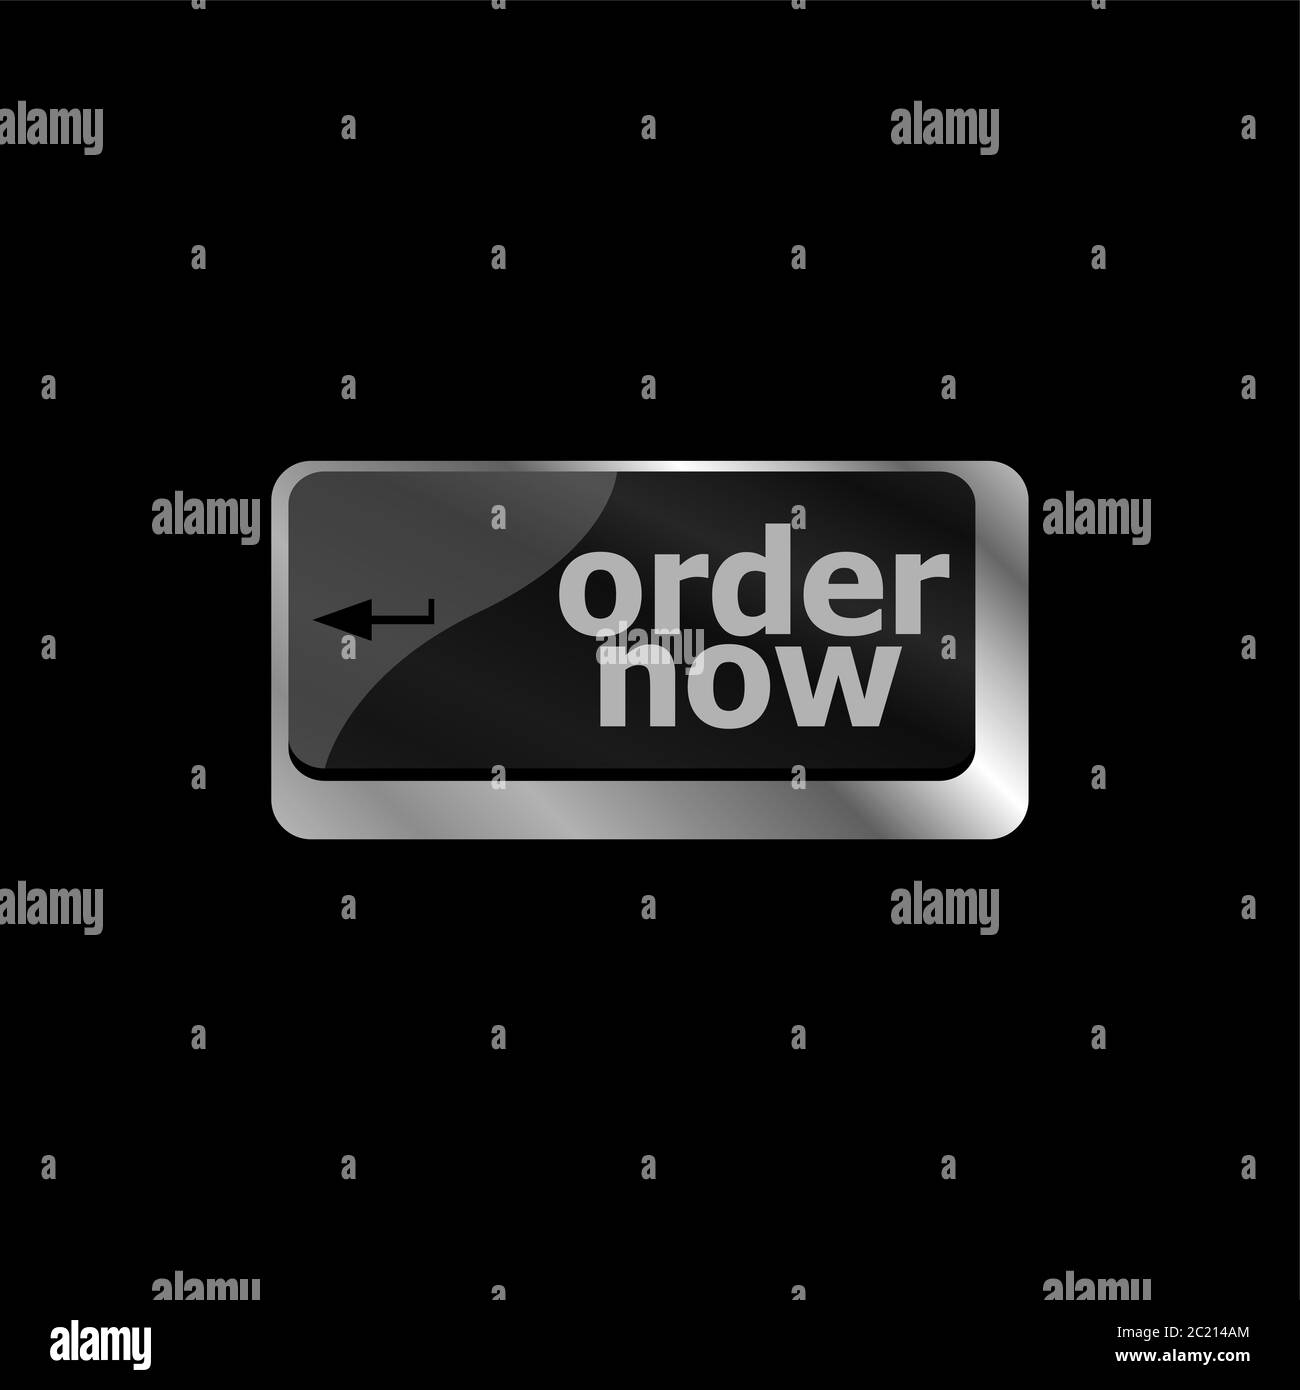 Order now computer key showing online purchases and shopping Stock Photo